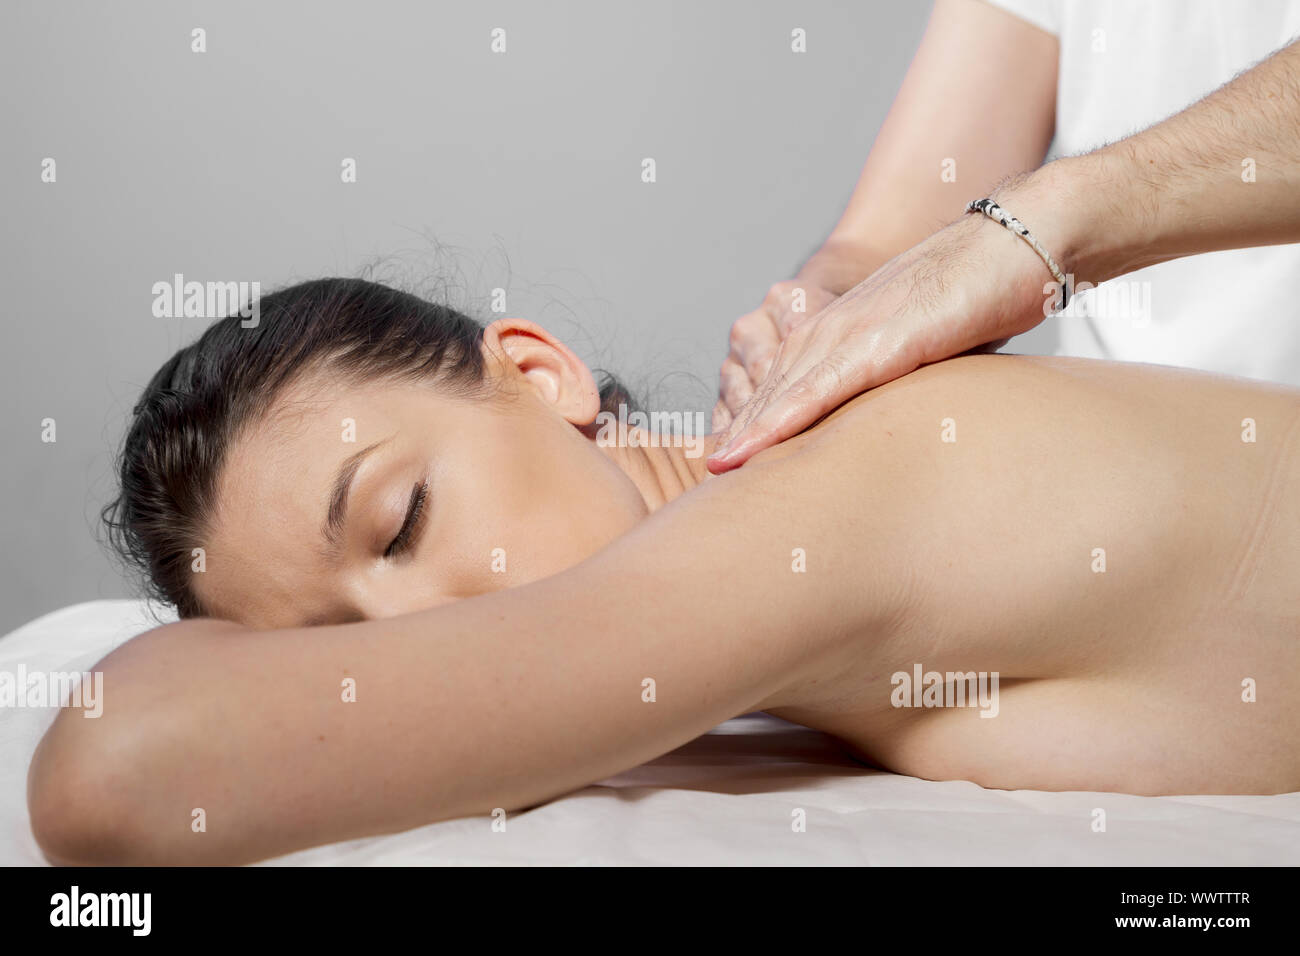 Massage and relaxation, beautiful brunette woman relaxing on a stretcher receiving a therapeutic massage from hands of a profess Stock Photo